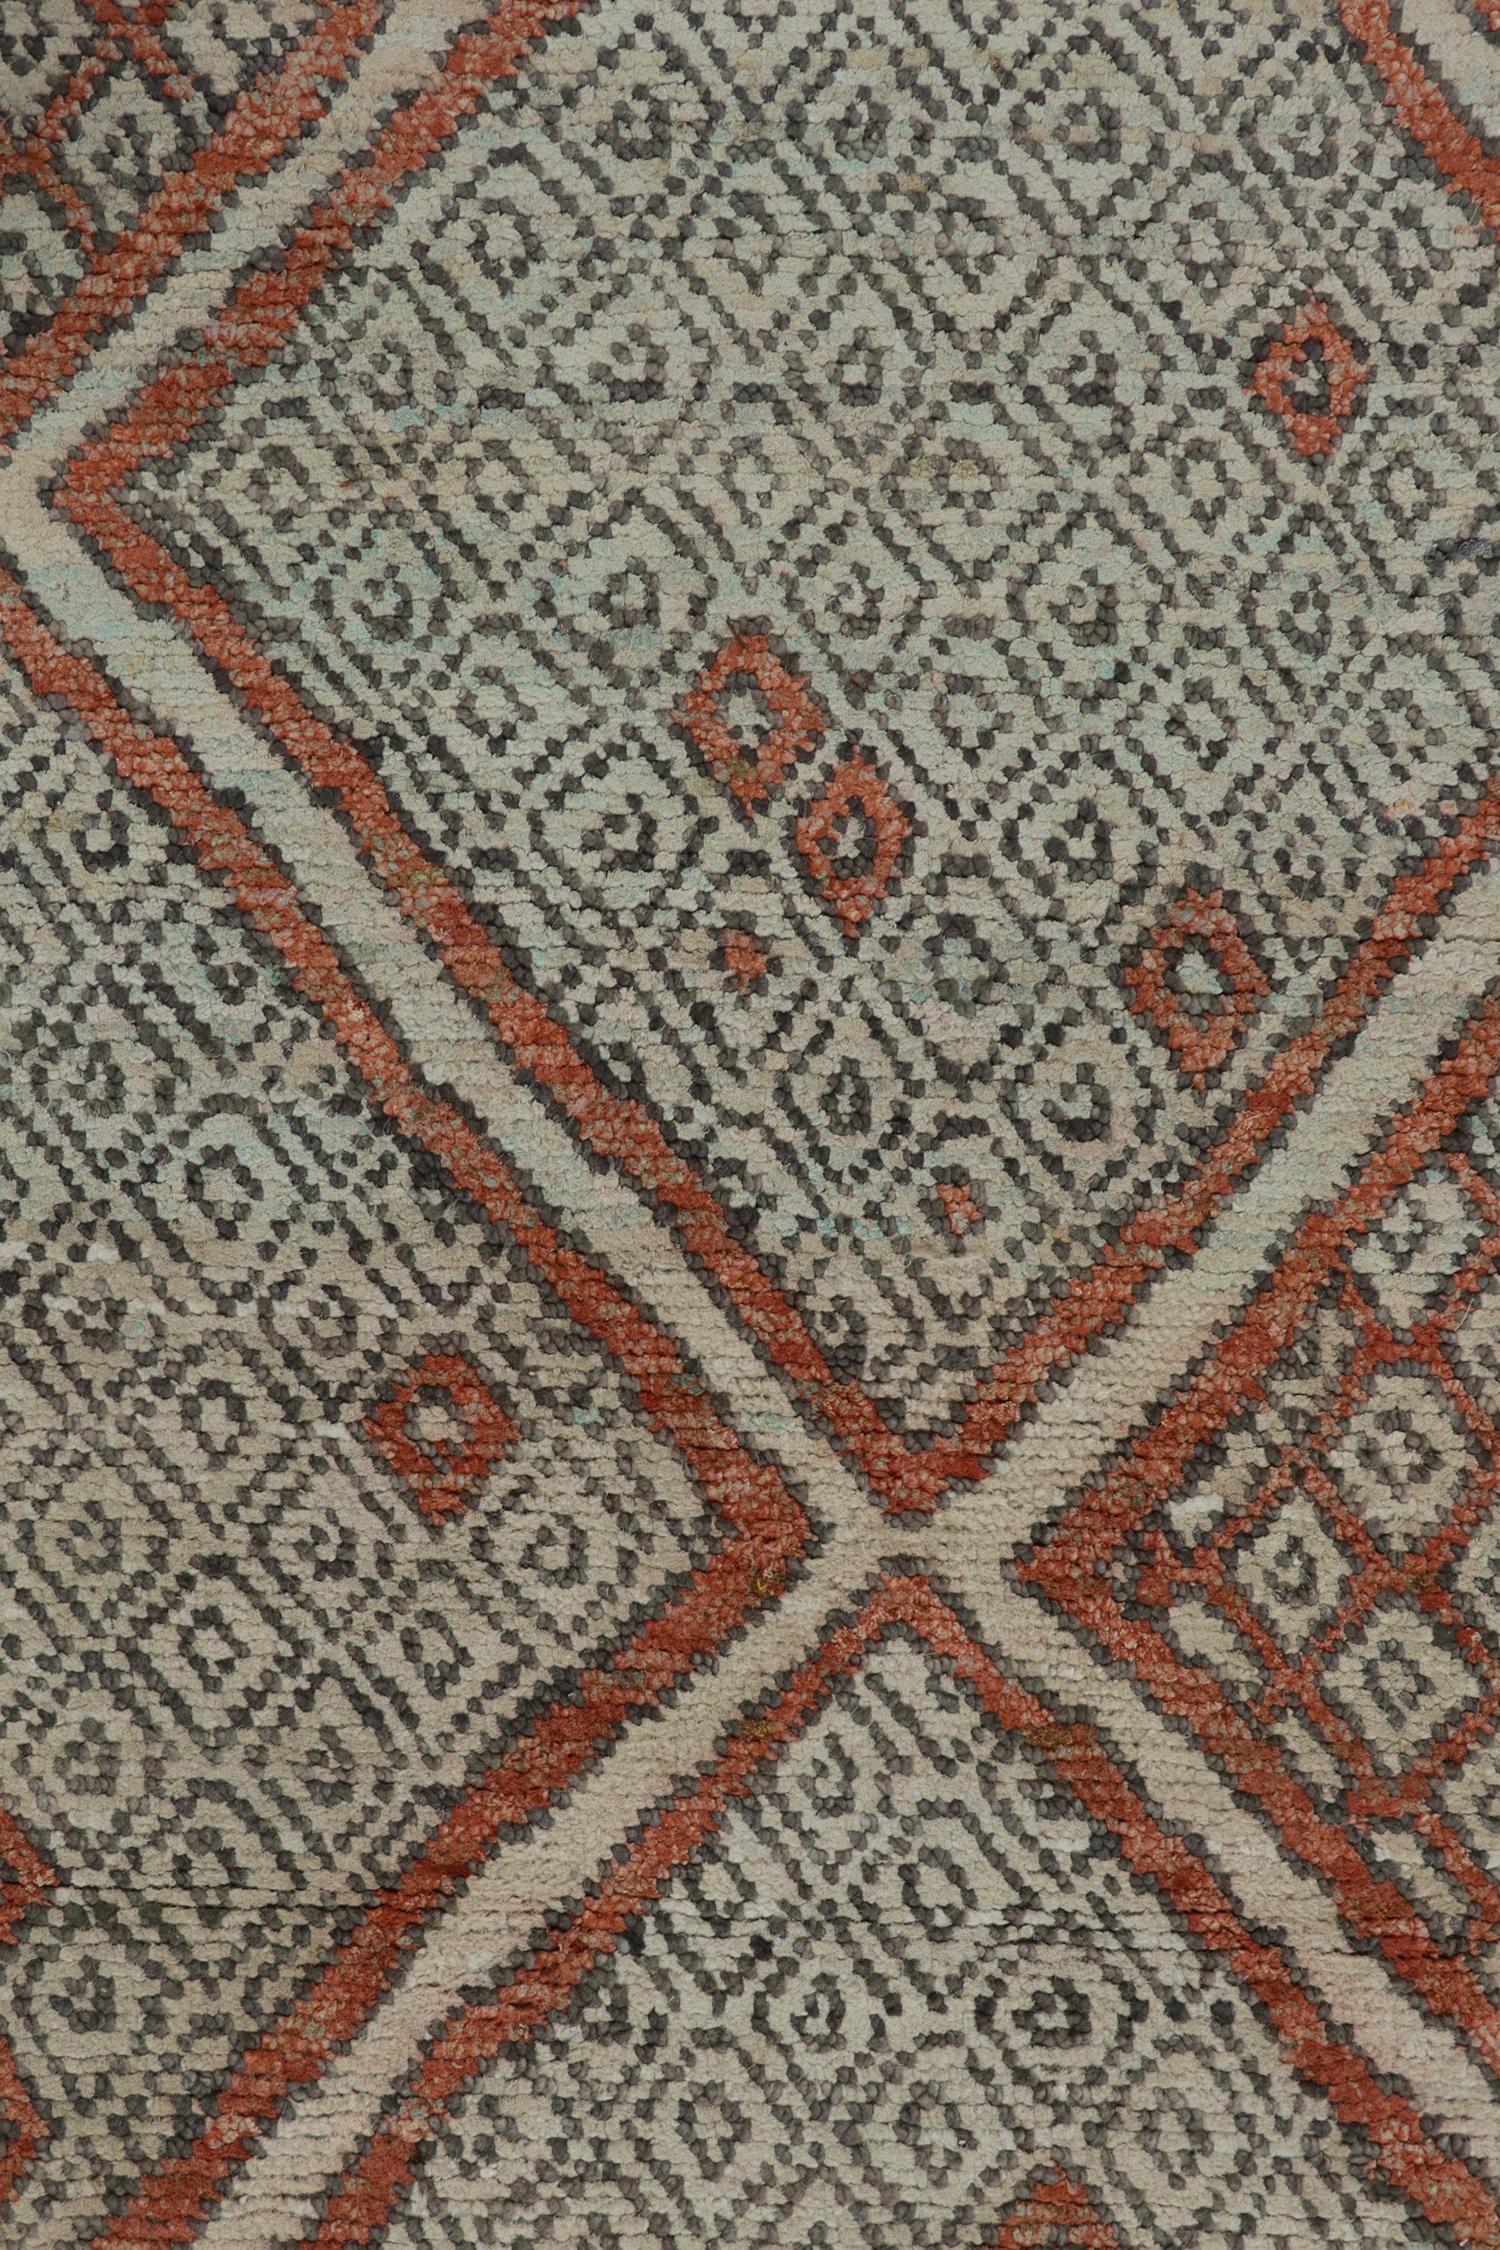 Rug & Kilim’s Moroccan Style Rug in Auburn Red and Gray Diamond Patterns In New Condition For Sale In Long Island City, NY